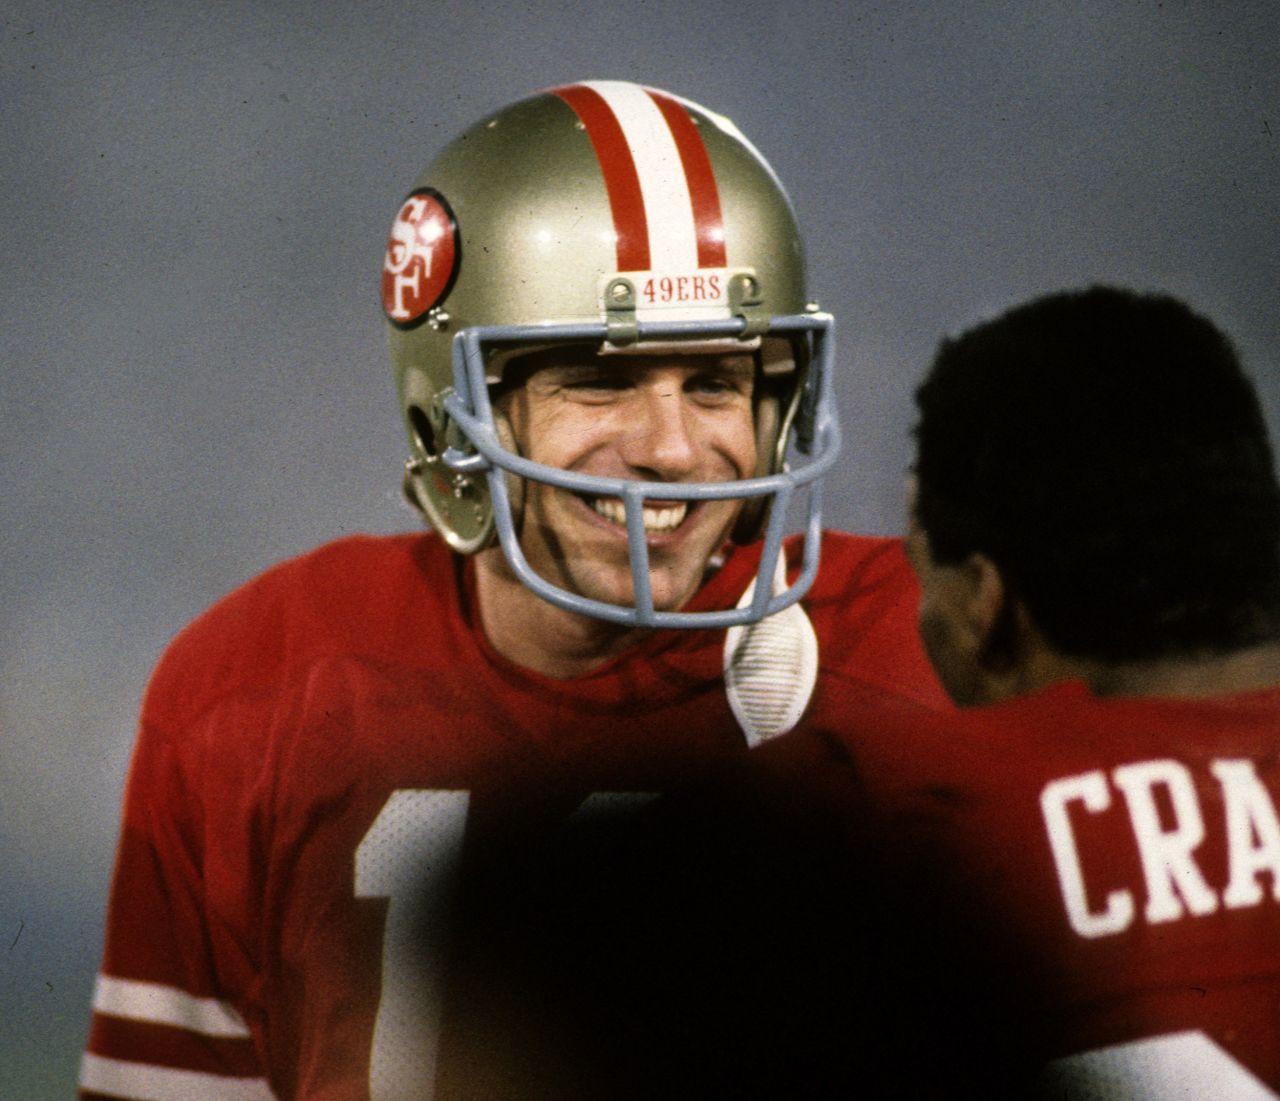 <strong>Super Bowl XIX (1985):</strong> Three years after winning his first Super Bowl MVP award, Joe Montana was at it again as he led the 49ers to a 38-16 victory over Miami. This time, "Joe Cool" threw for 331 yards and three touchdowns.